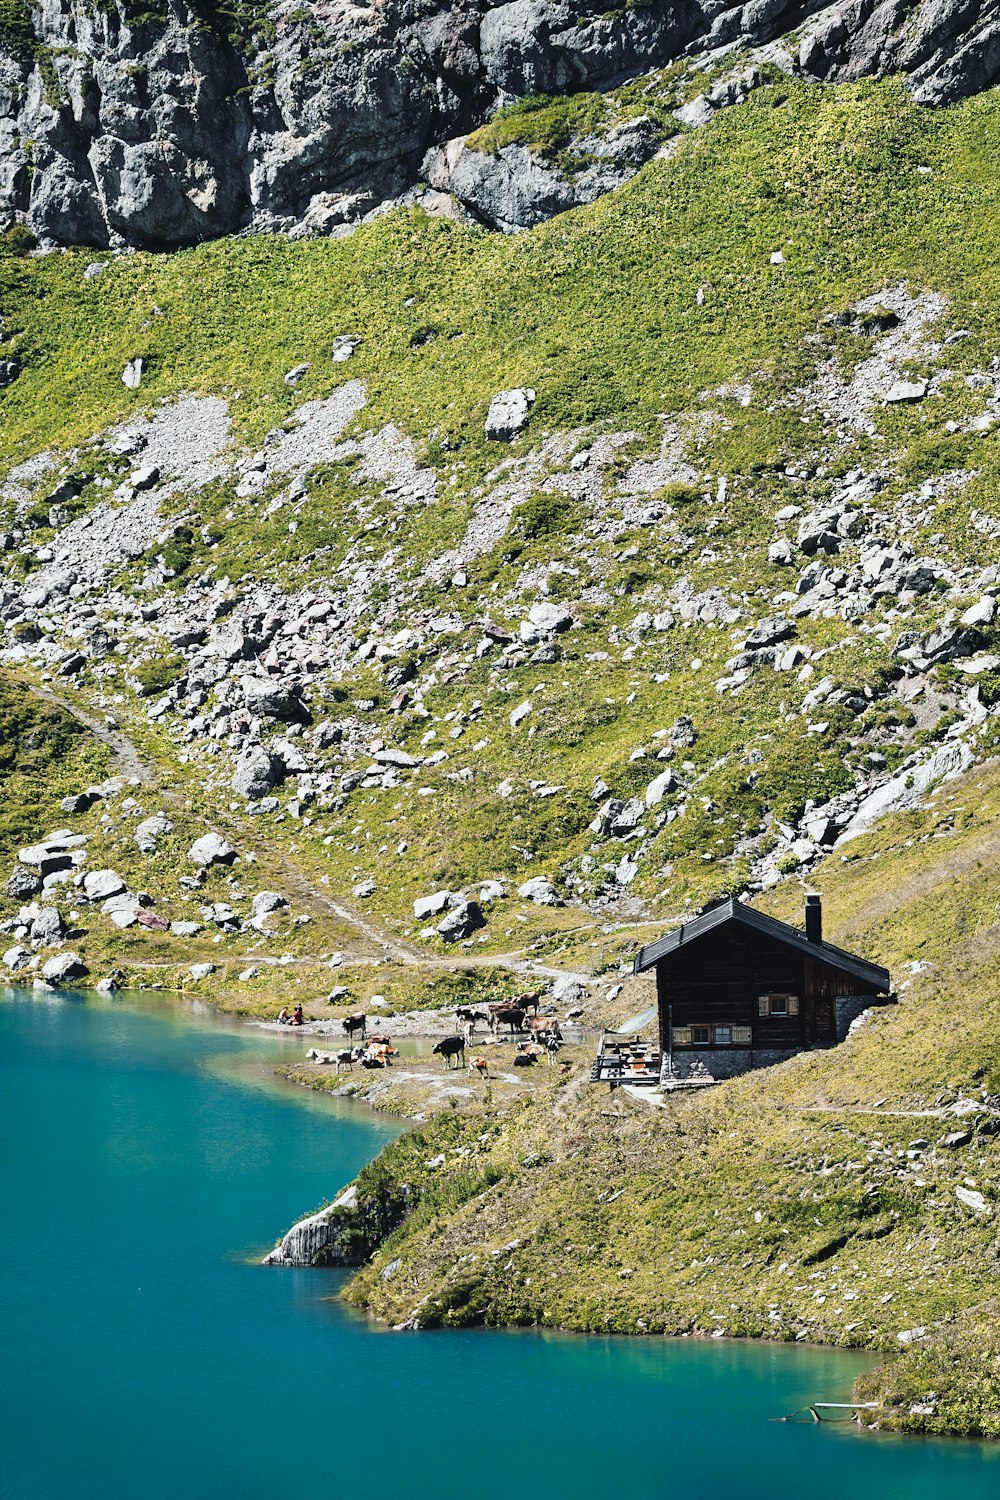 a small cabin on the side of a mountain next to a lake